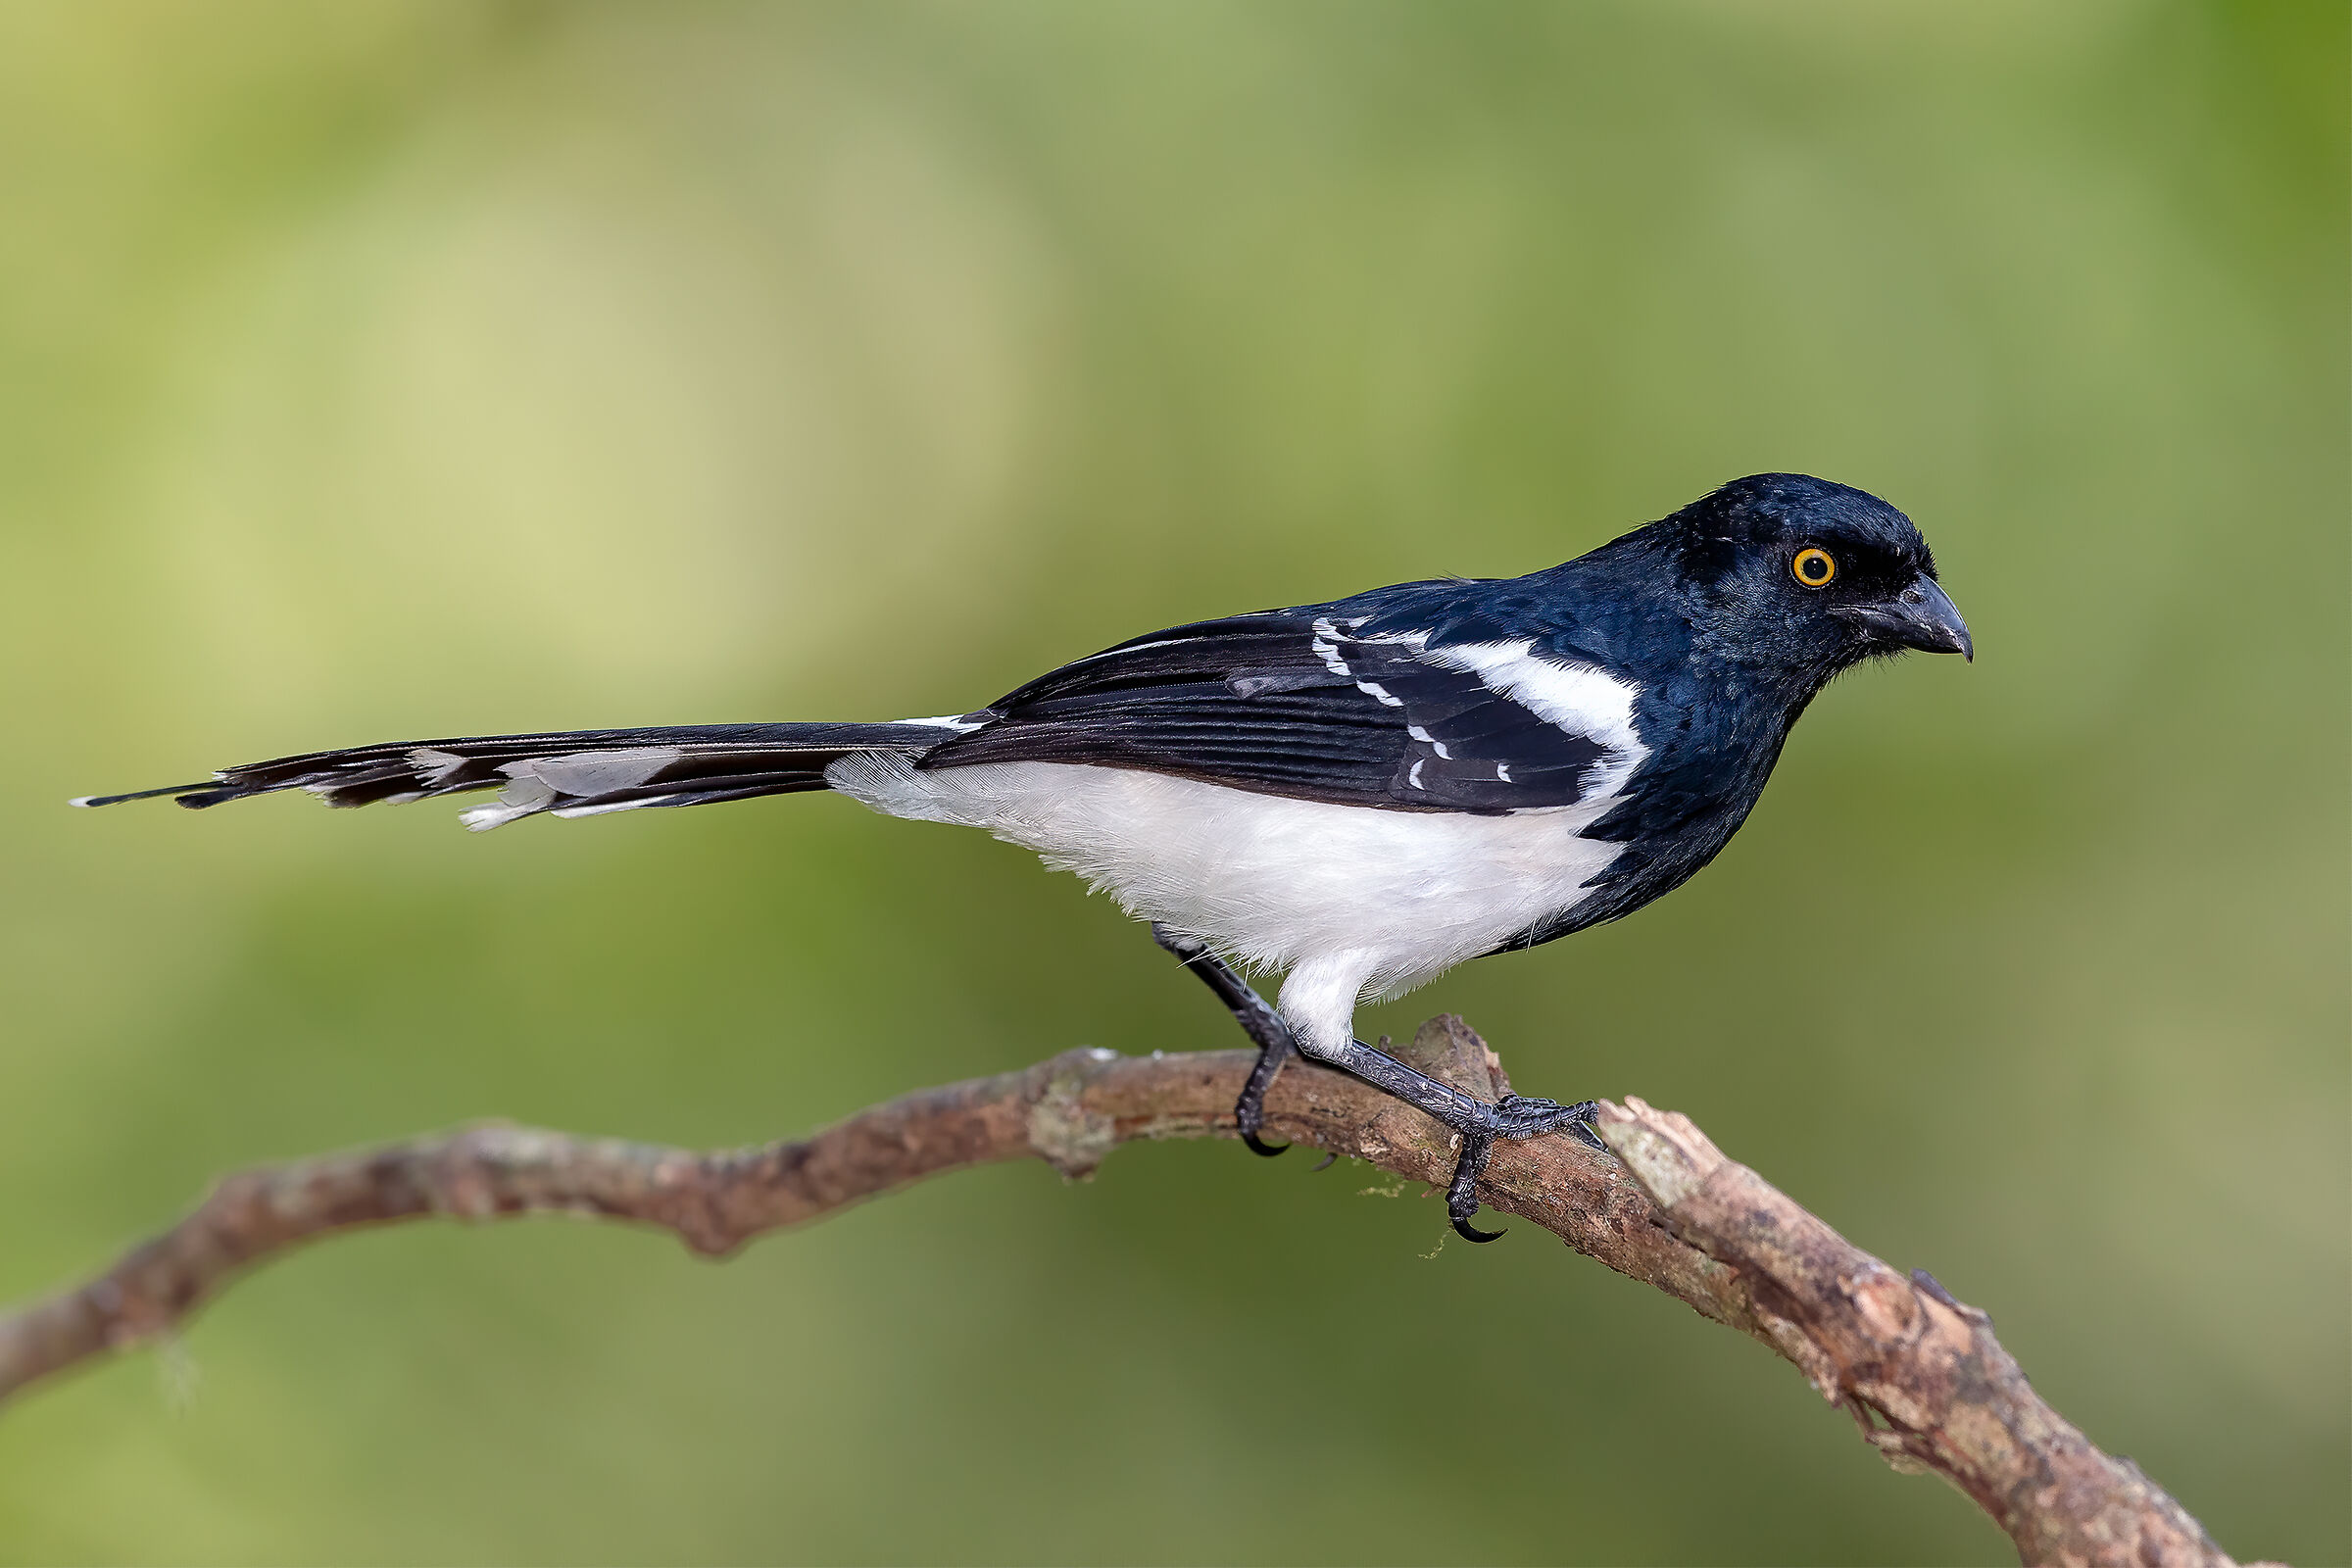 Tanagra magpie/Magpie tanager...